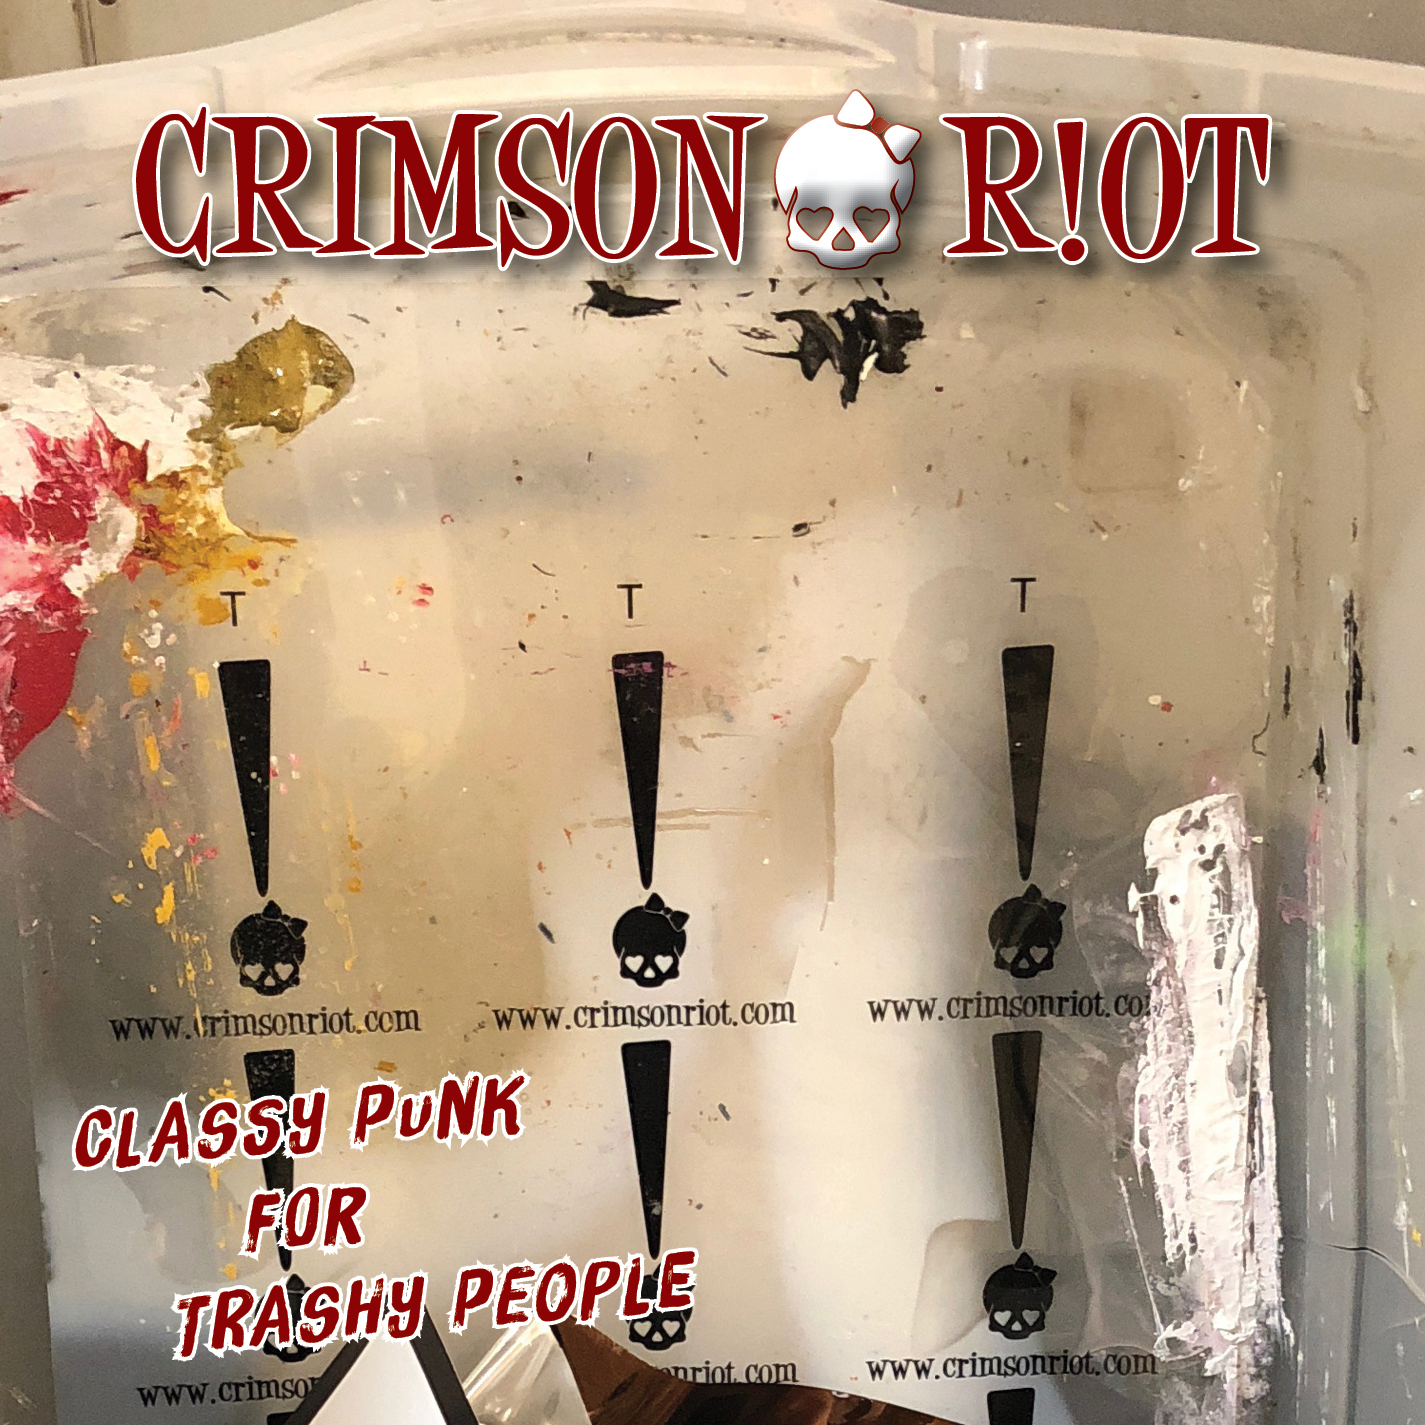 Classy Punk For Trashy People – The Newest From Crimson Riot!